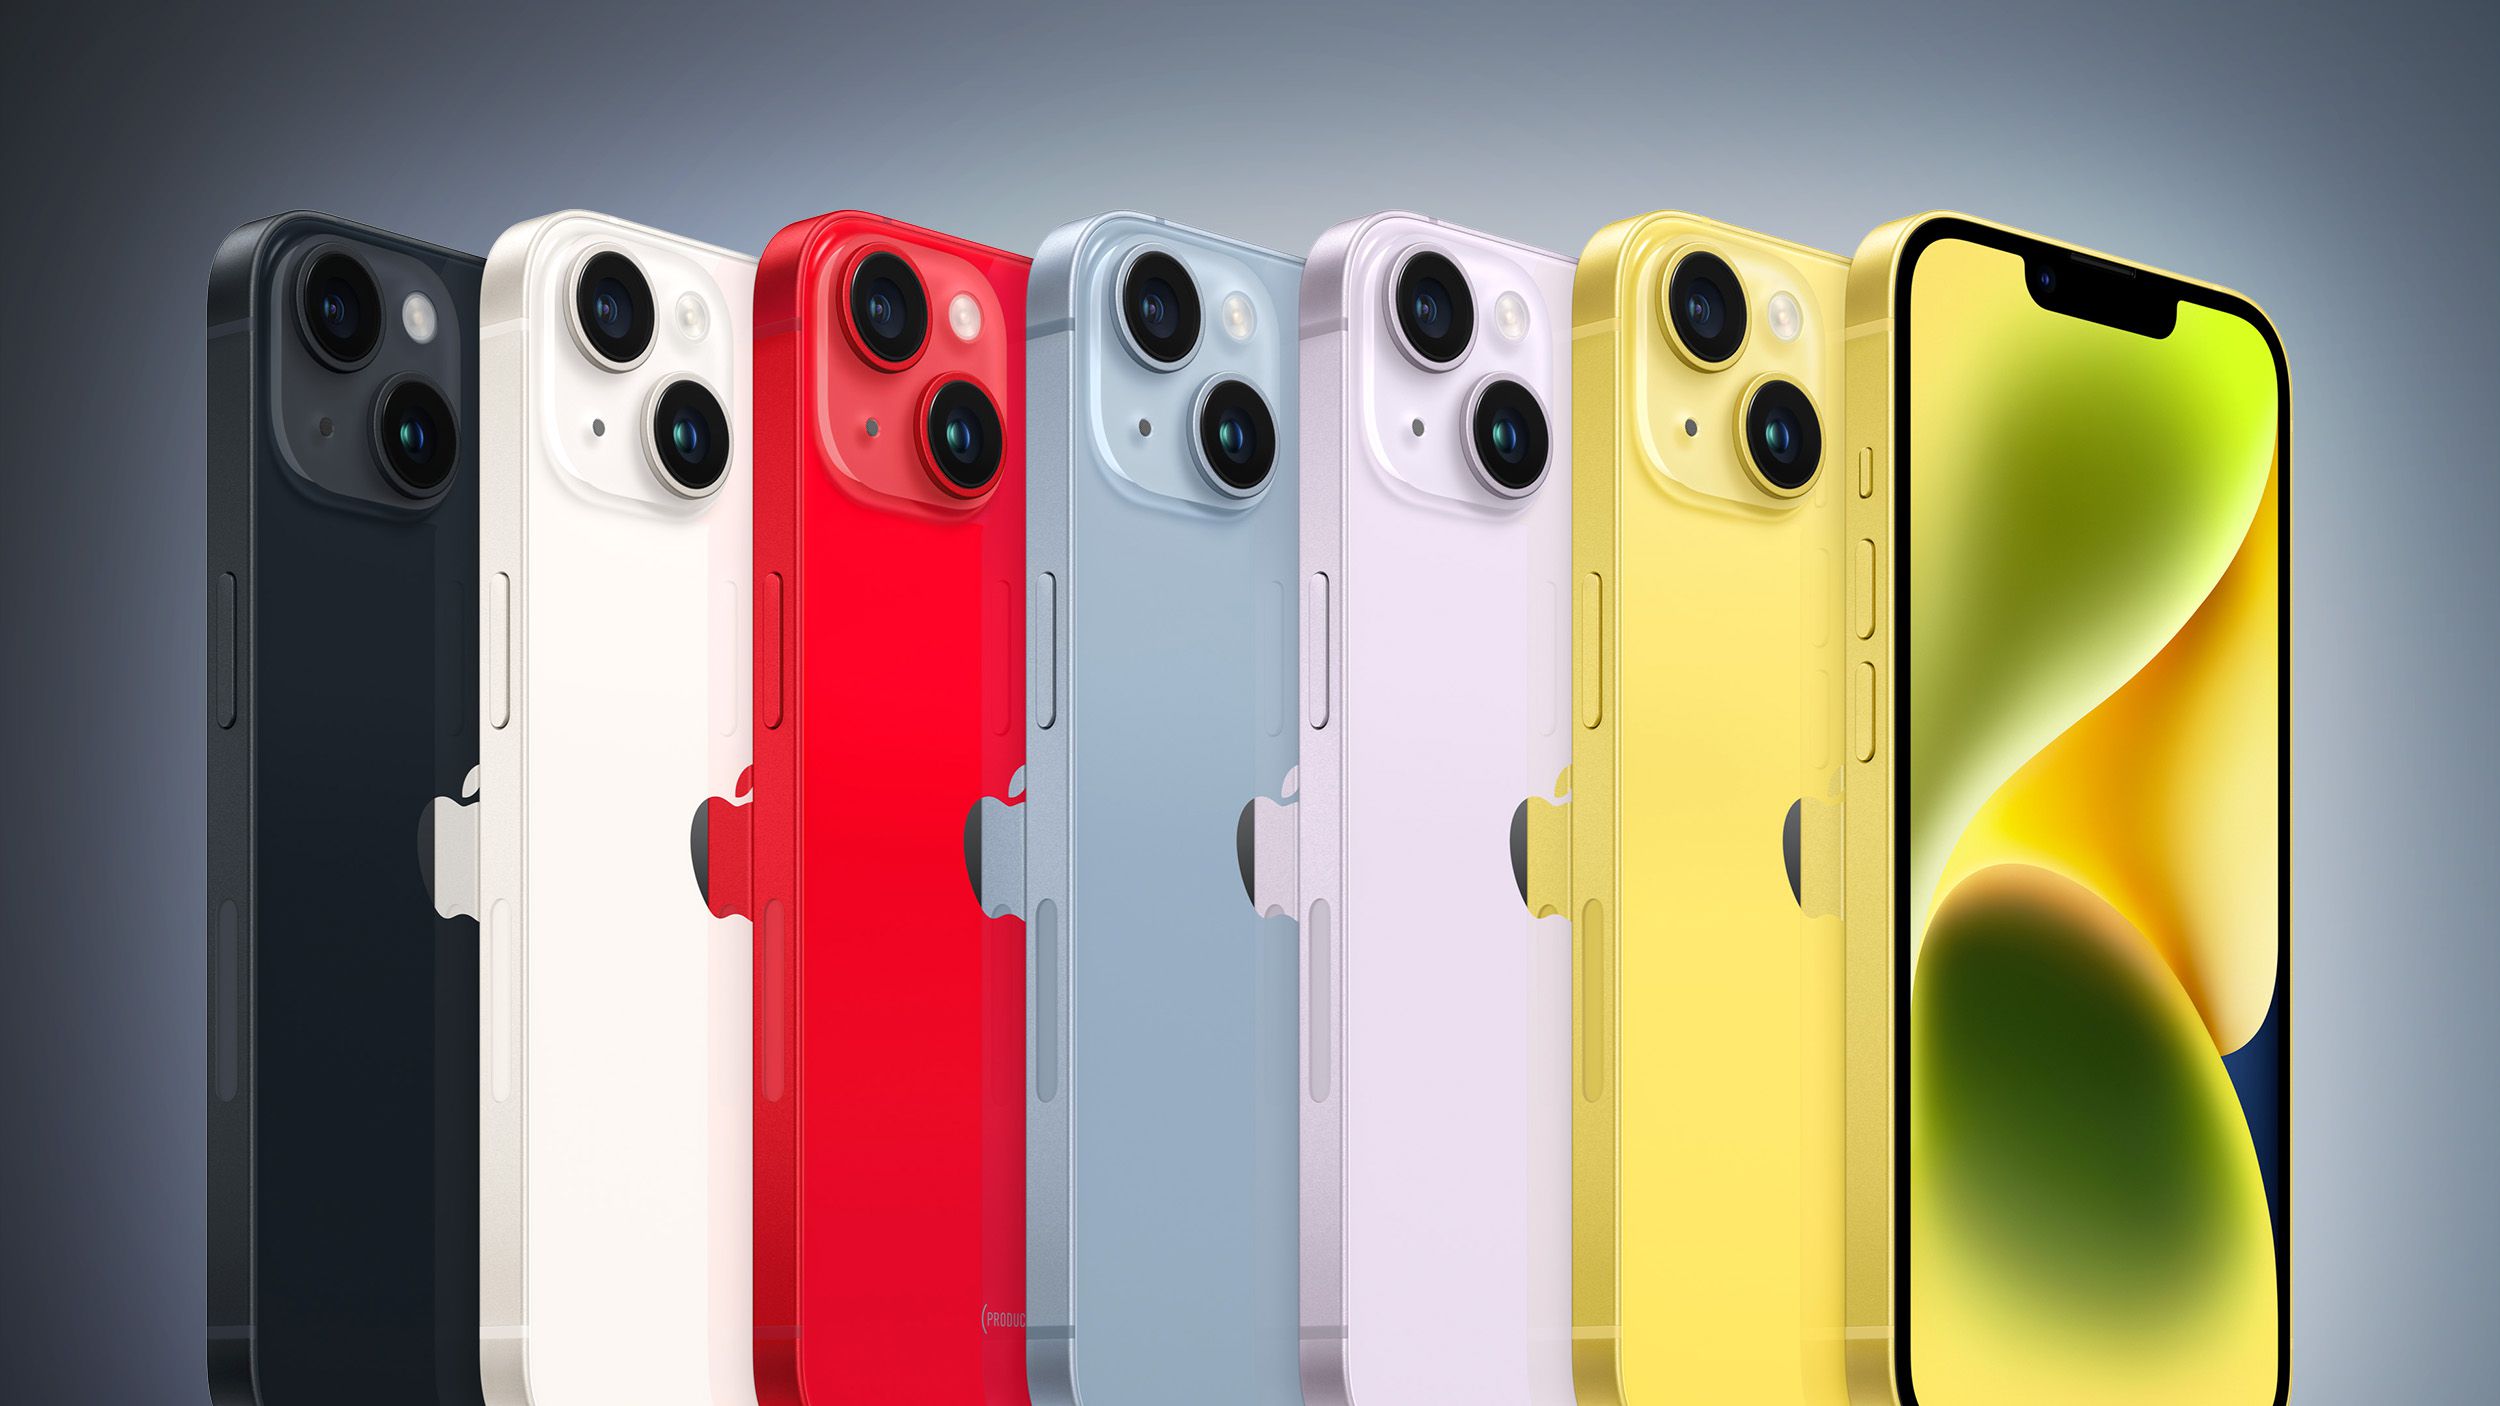 iphone 6 color choices